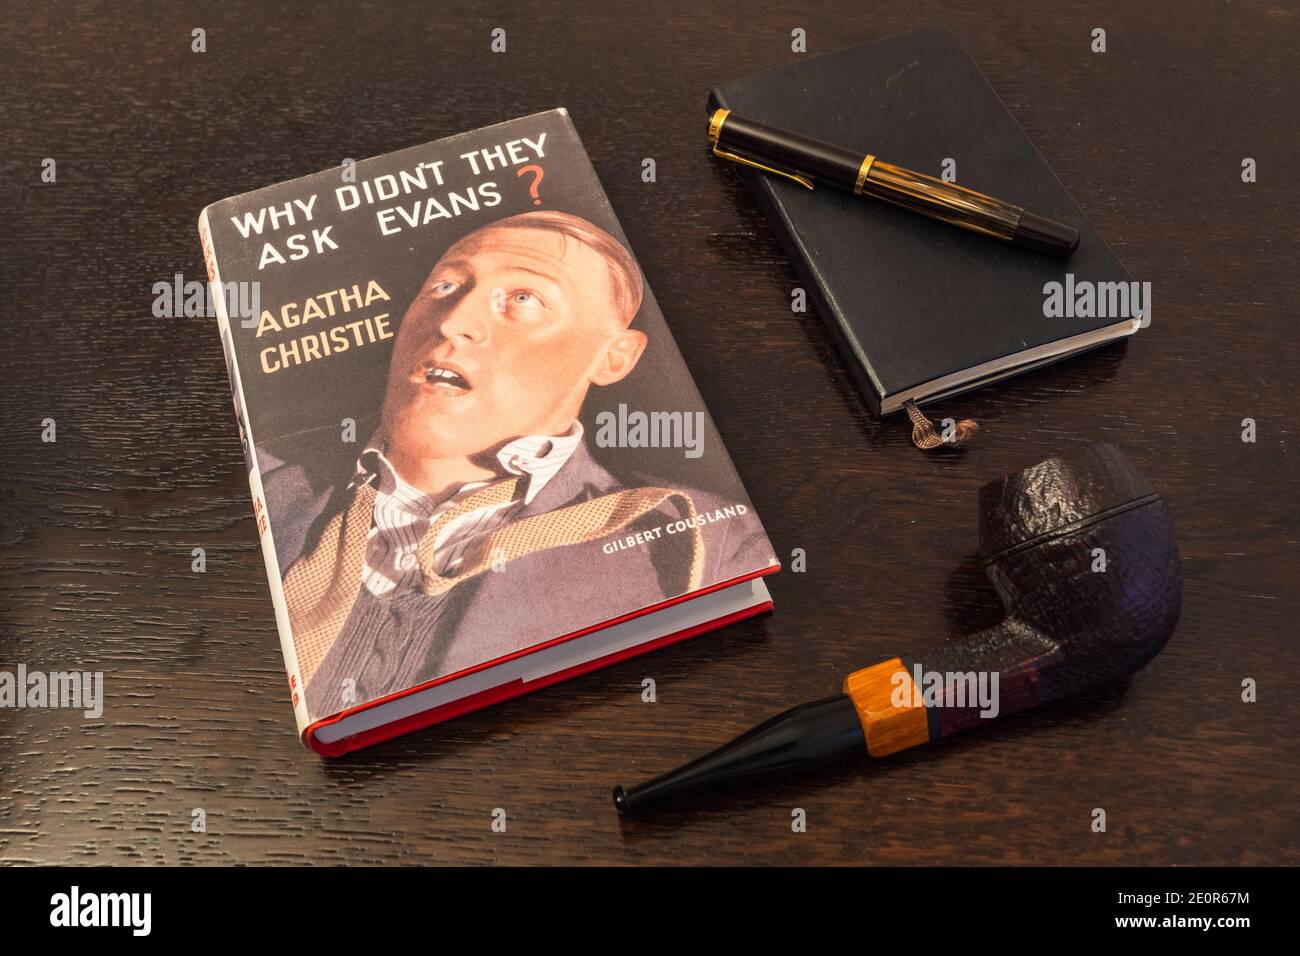 London, England, UK - January 2 2021: Why didn't they ask Evans Book by Agatha Christie in a Facsimile First Edition with Tobacco Pipe, Fountian Pen a Stock Photo